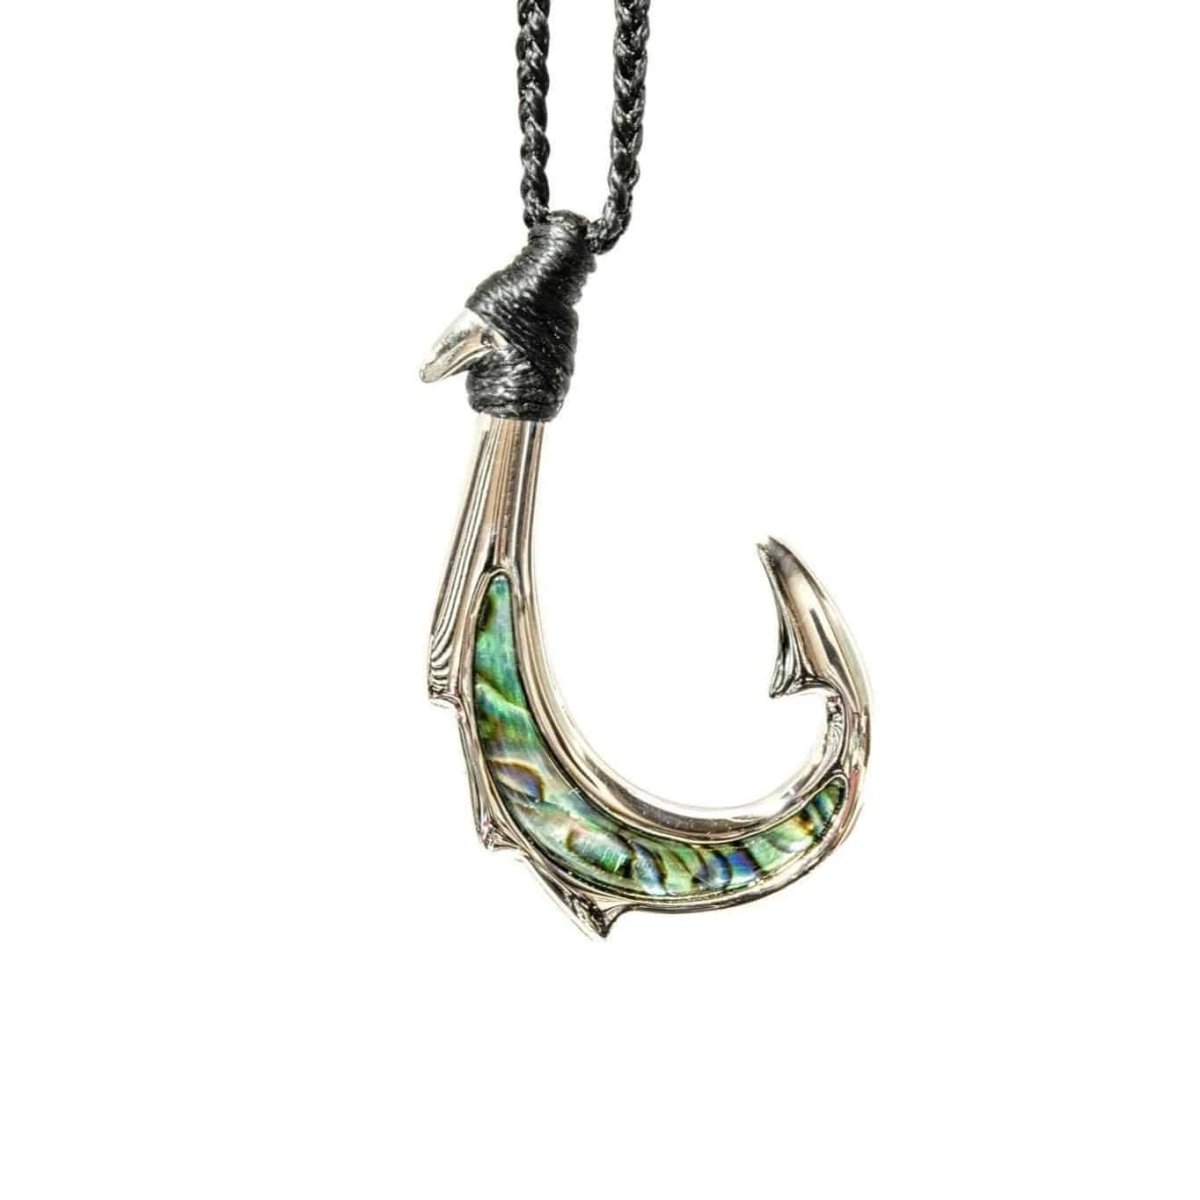 New Zealand Paua Shell Stainless Steel bound Fish Hook Necklace - Earthbound Pacific